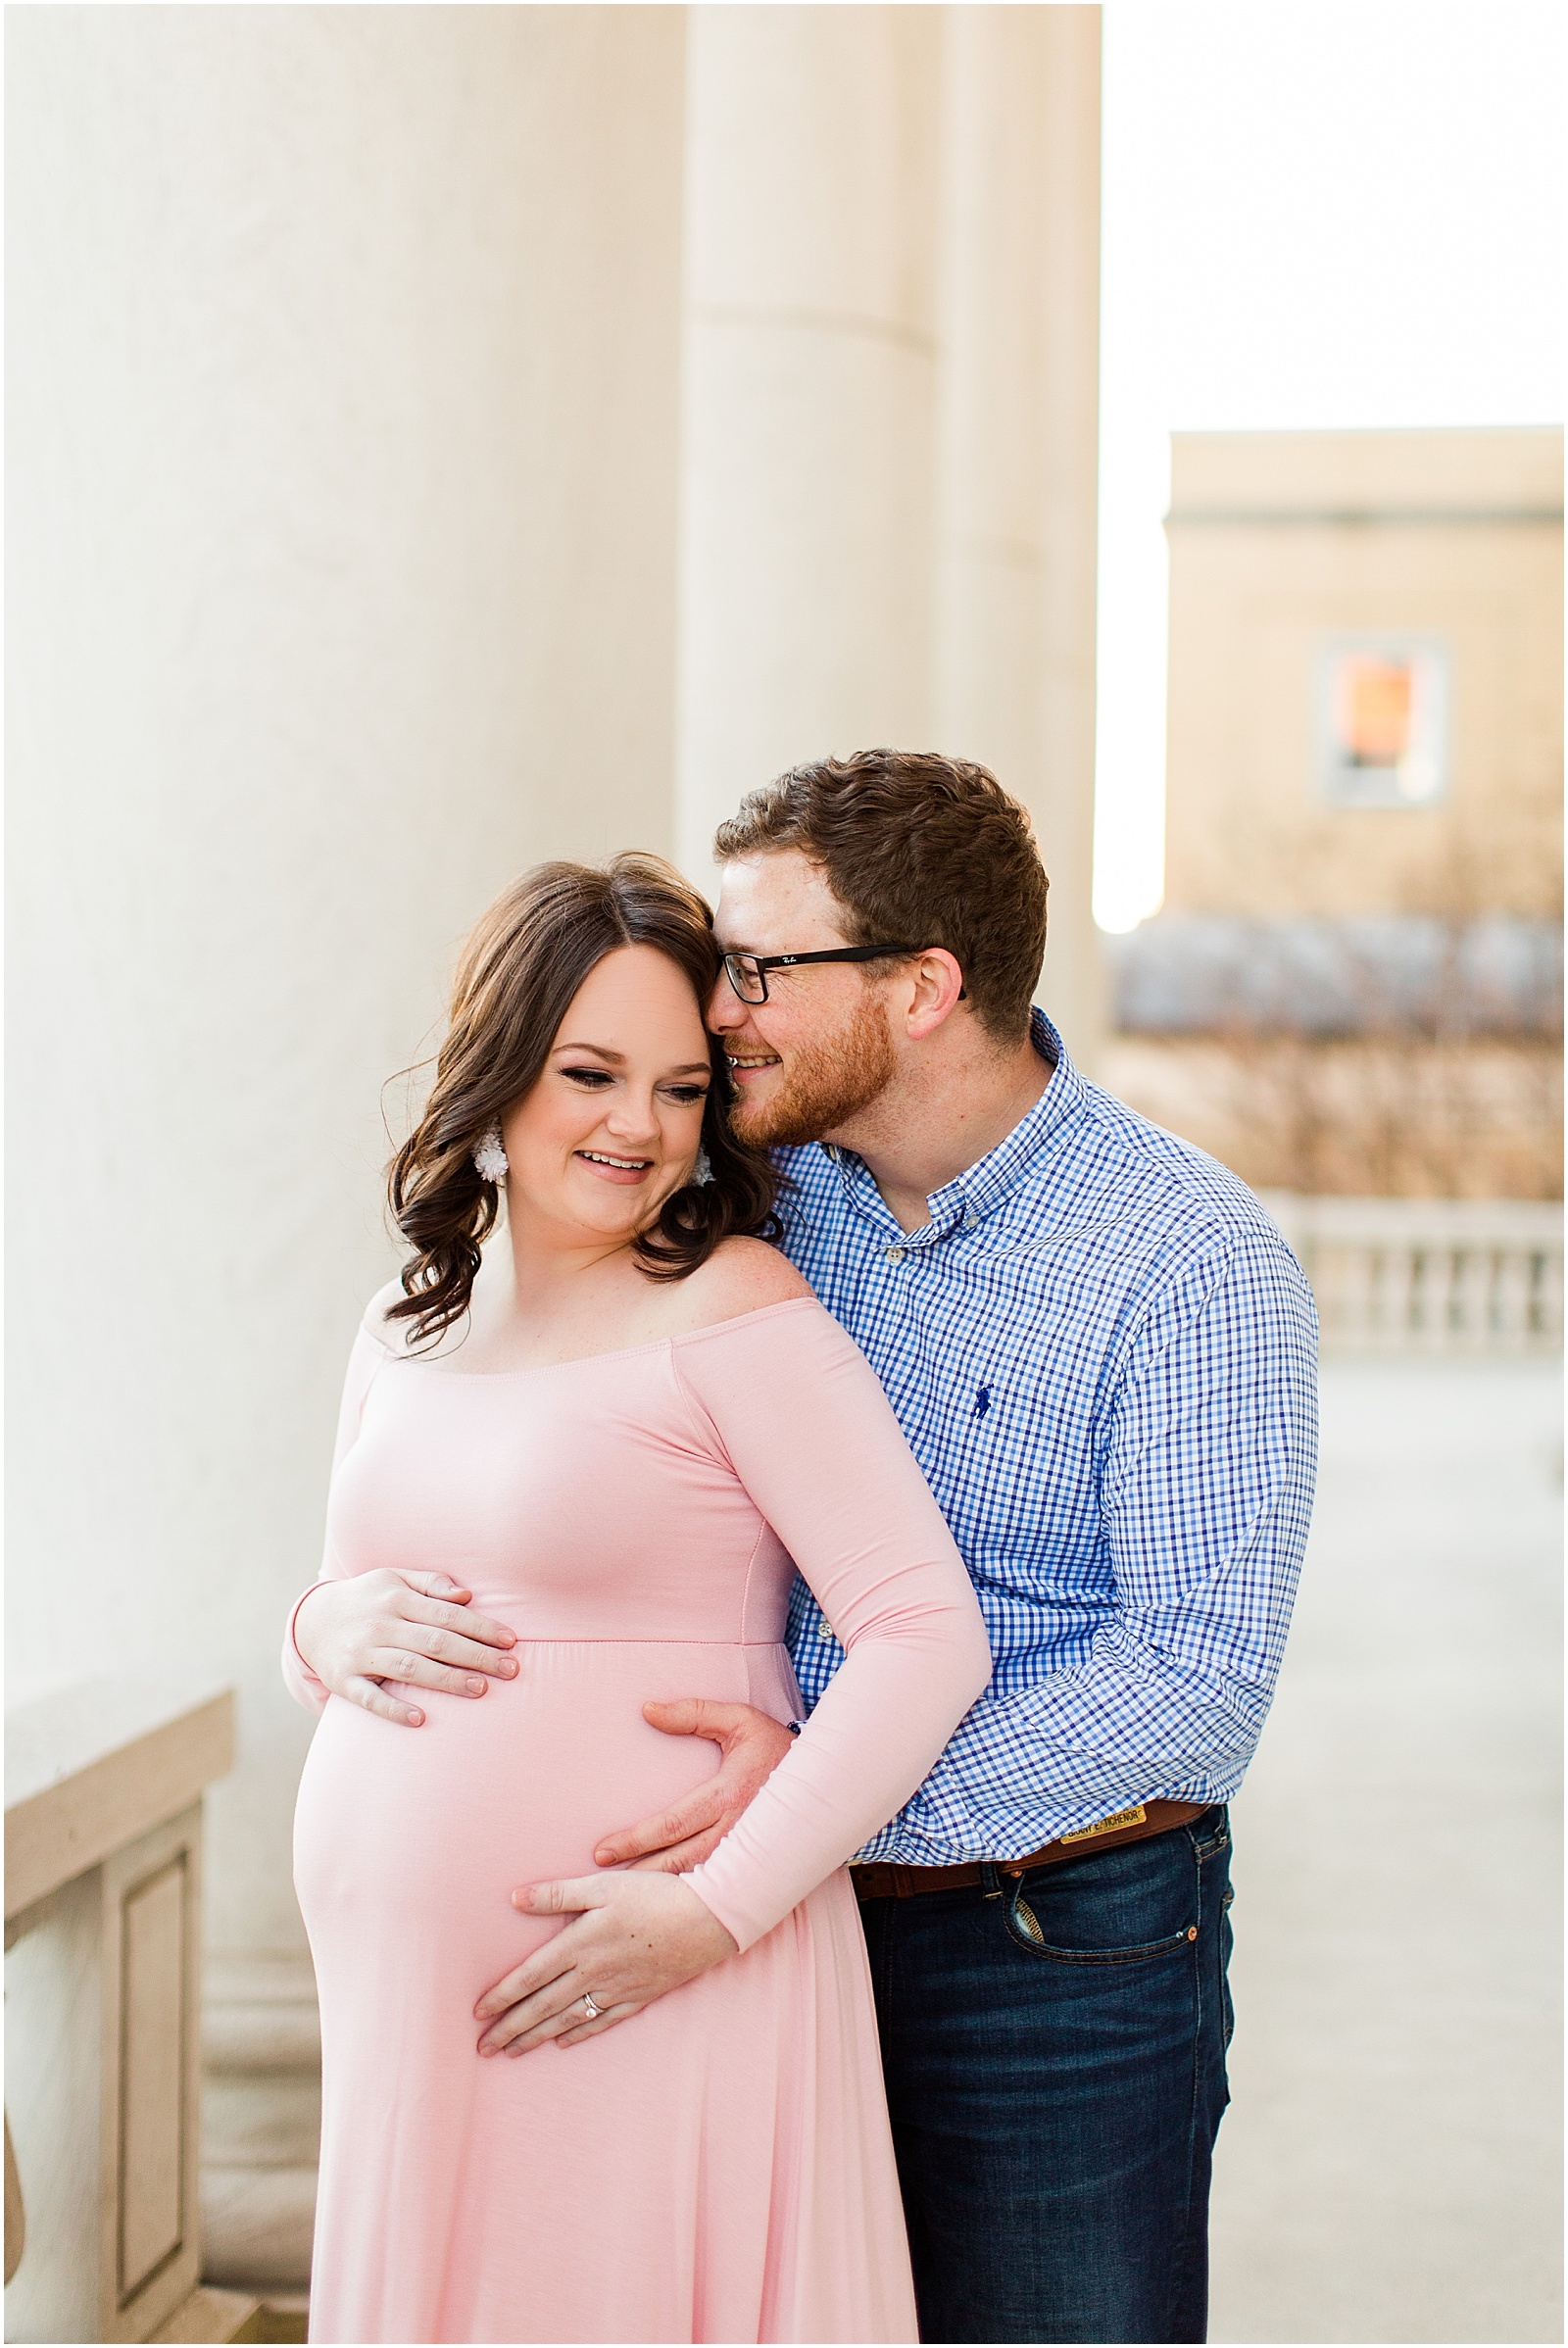 A Downtown Owensboro Maternity Session | Kayla and Grant Evansville Indiana Wedding Photographers-0015.jpg